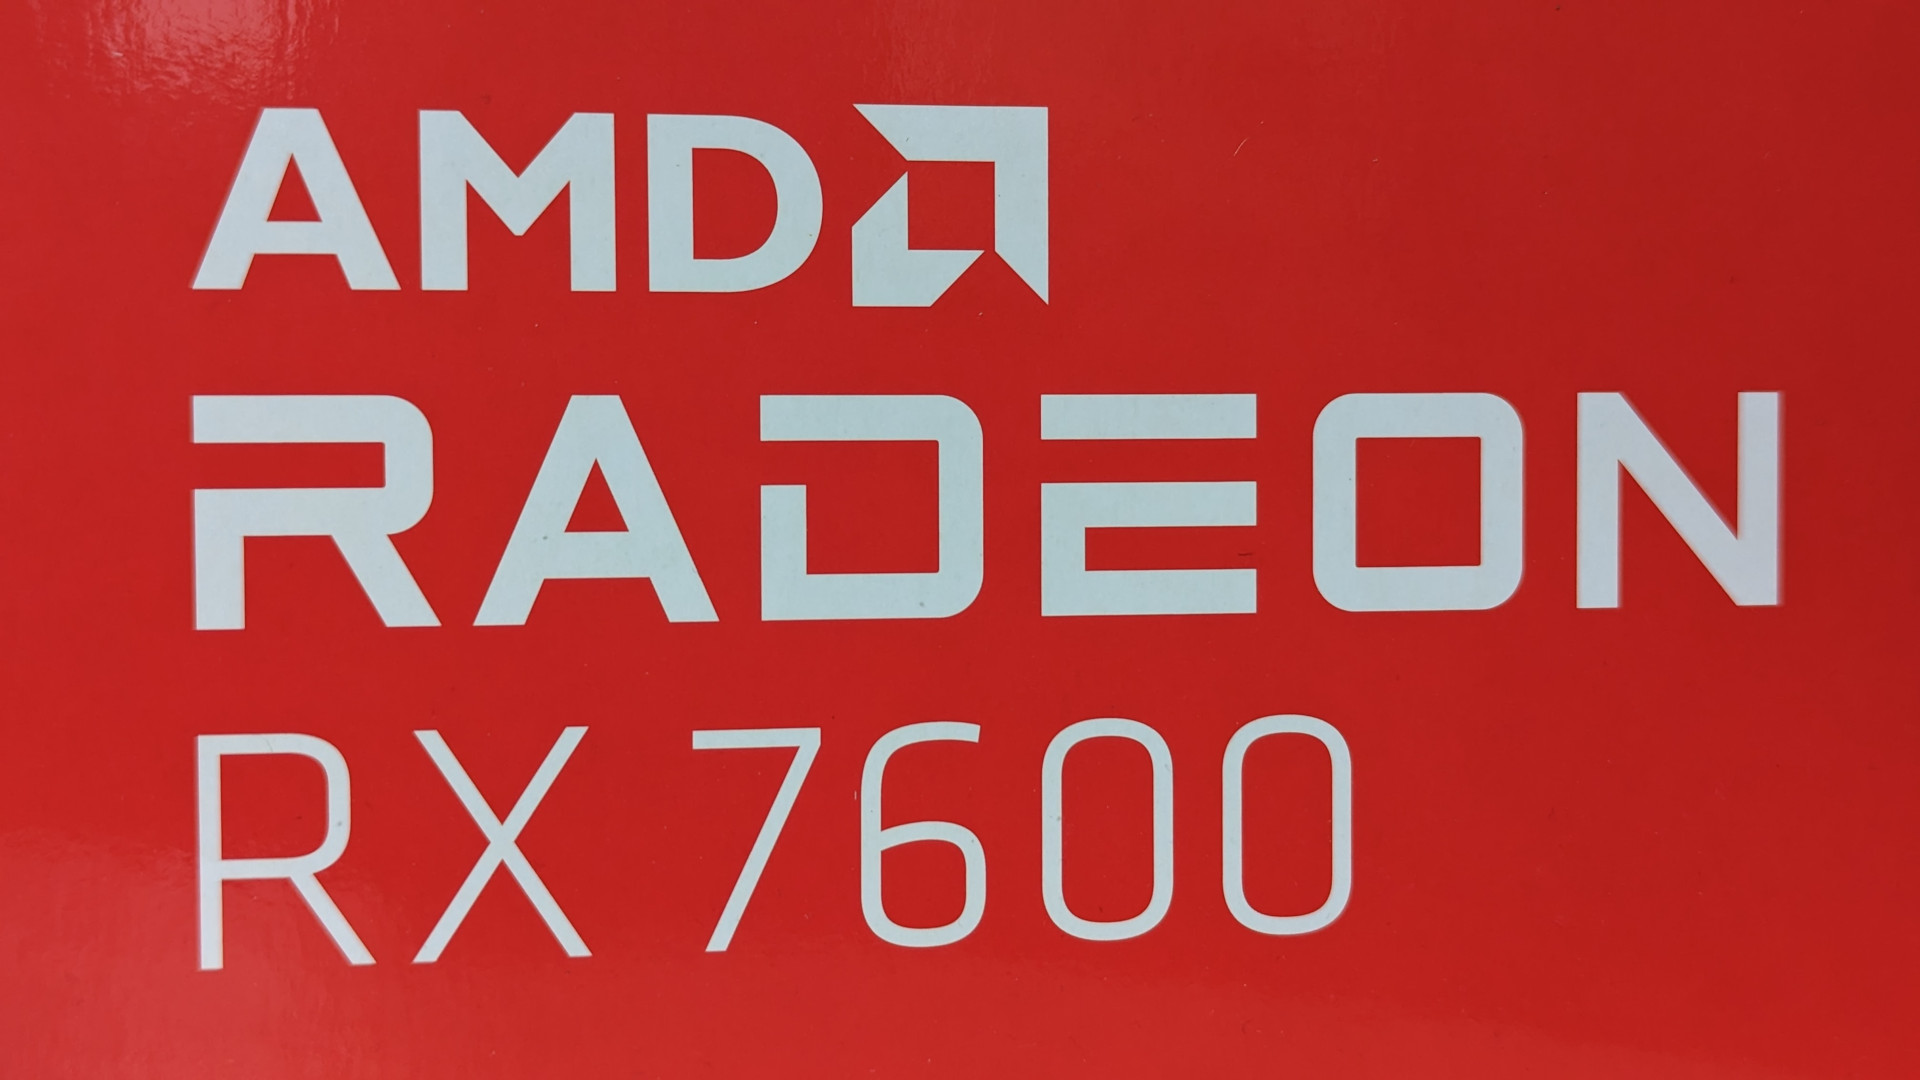 AMD Radeon RX 7600 review: The official 'AMD Radeon RX 7600' white text on a red background